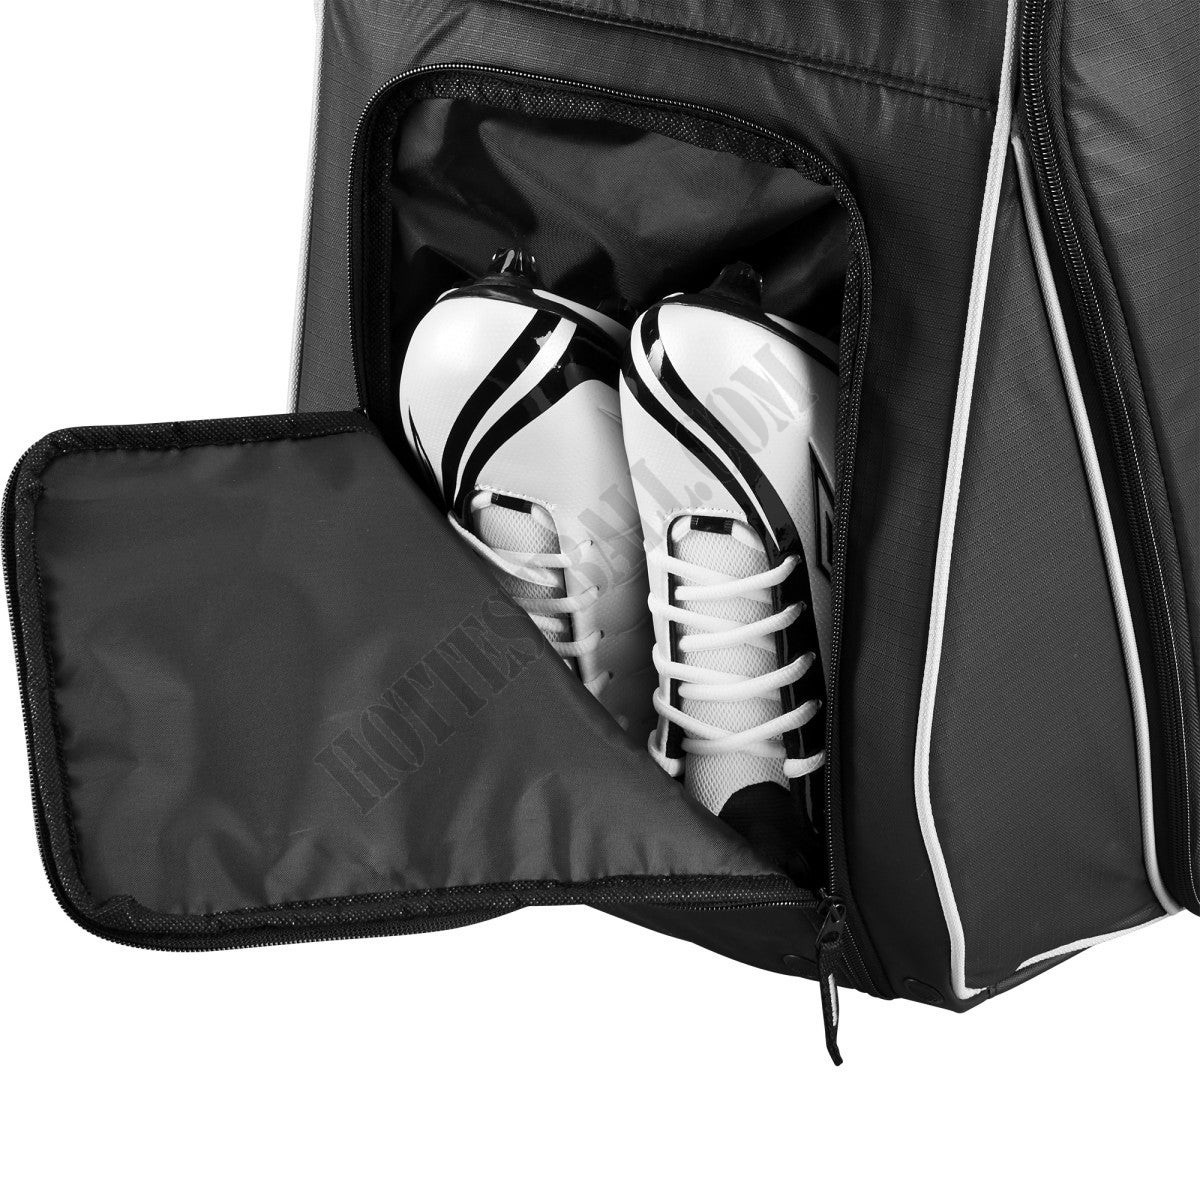 Tackle Football Player Equipment Bag - Wilson Discount Store - -4